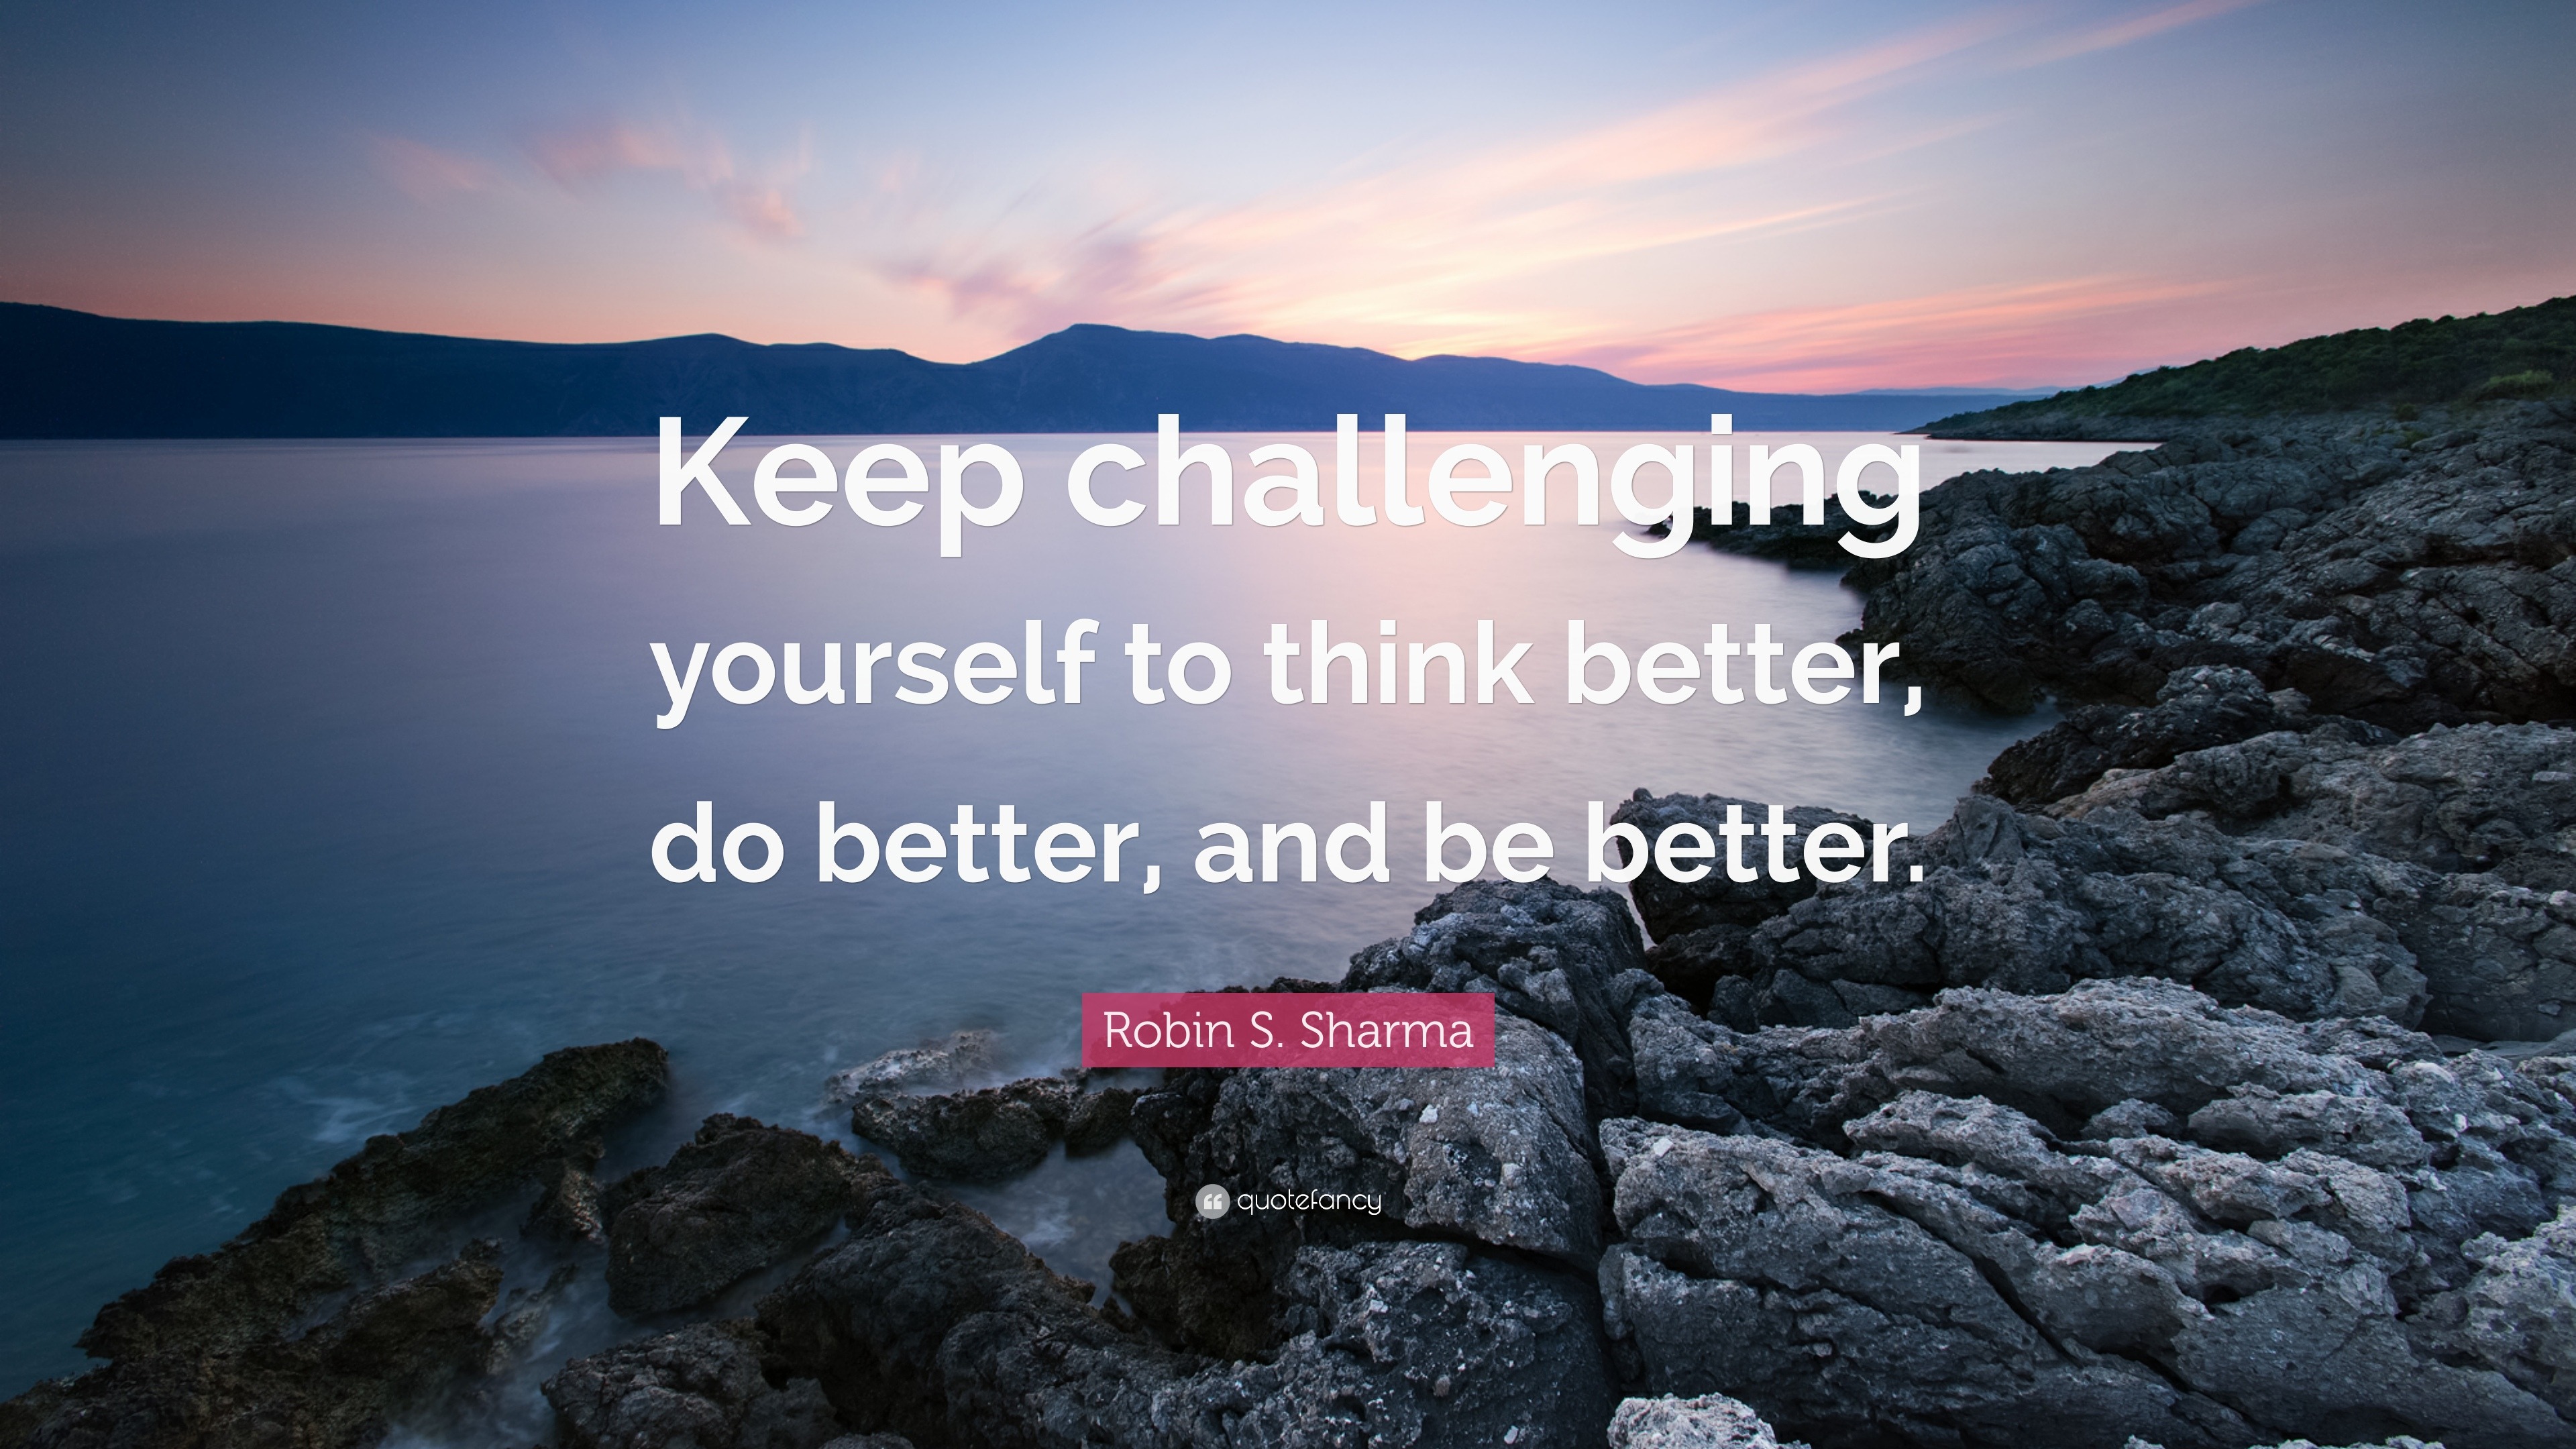 Motivational Quotes About Life Challenges